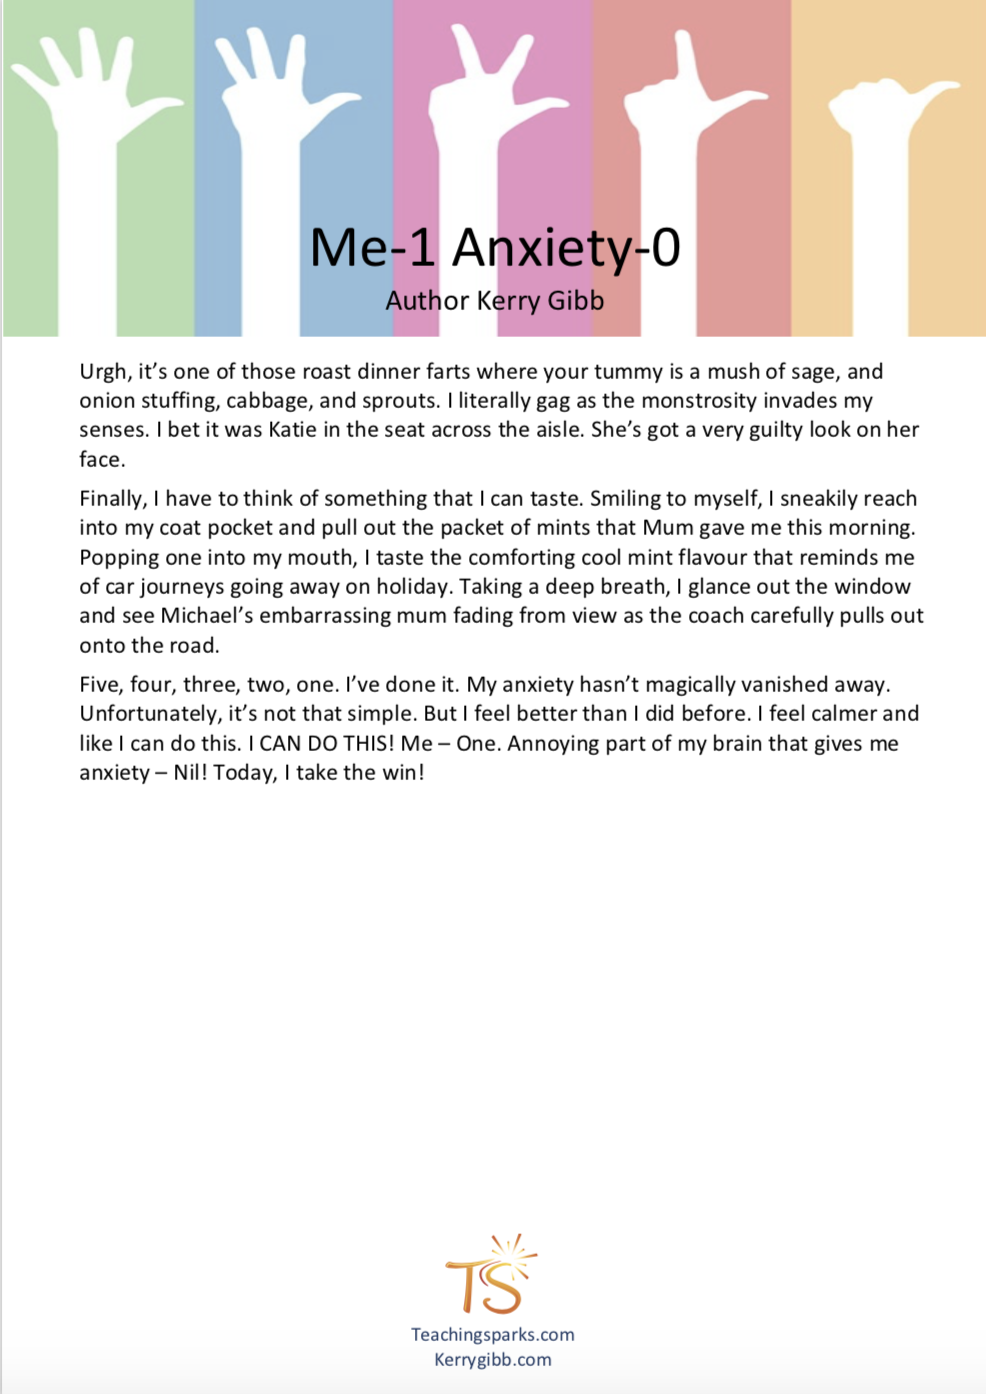 creative writing stories about anxiety